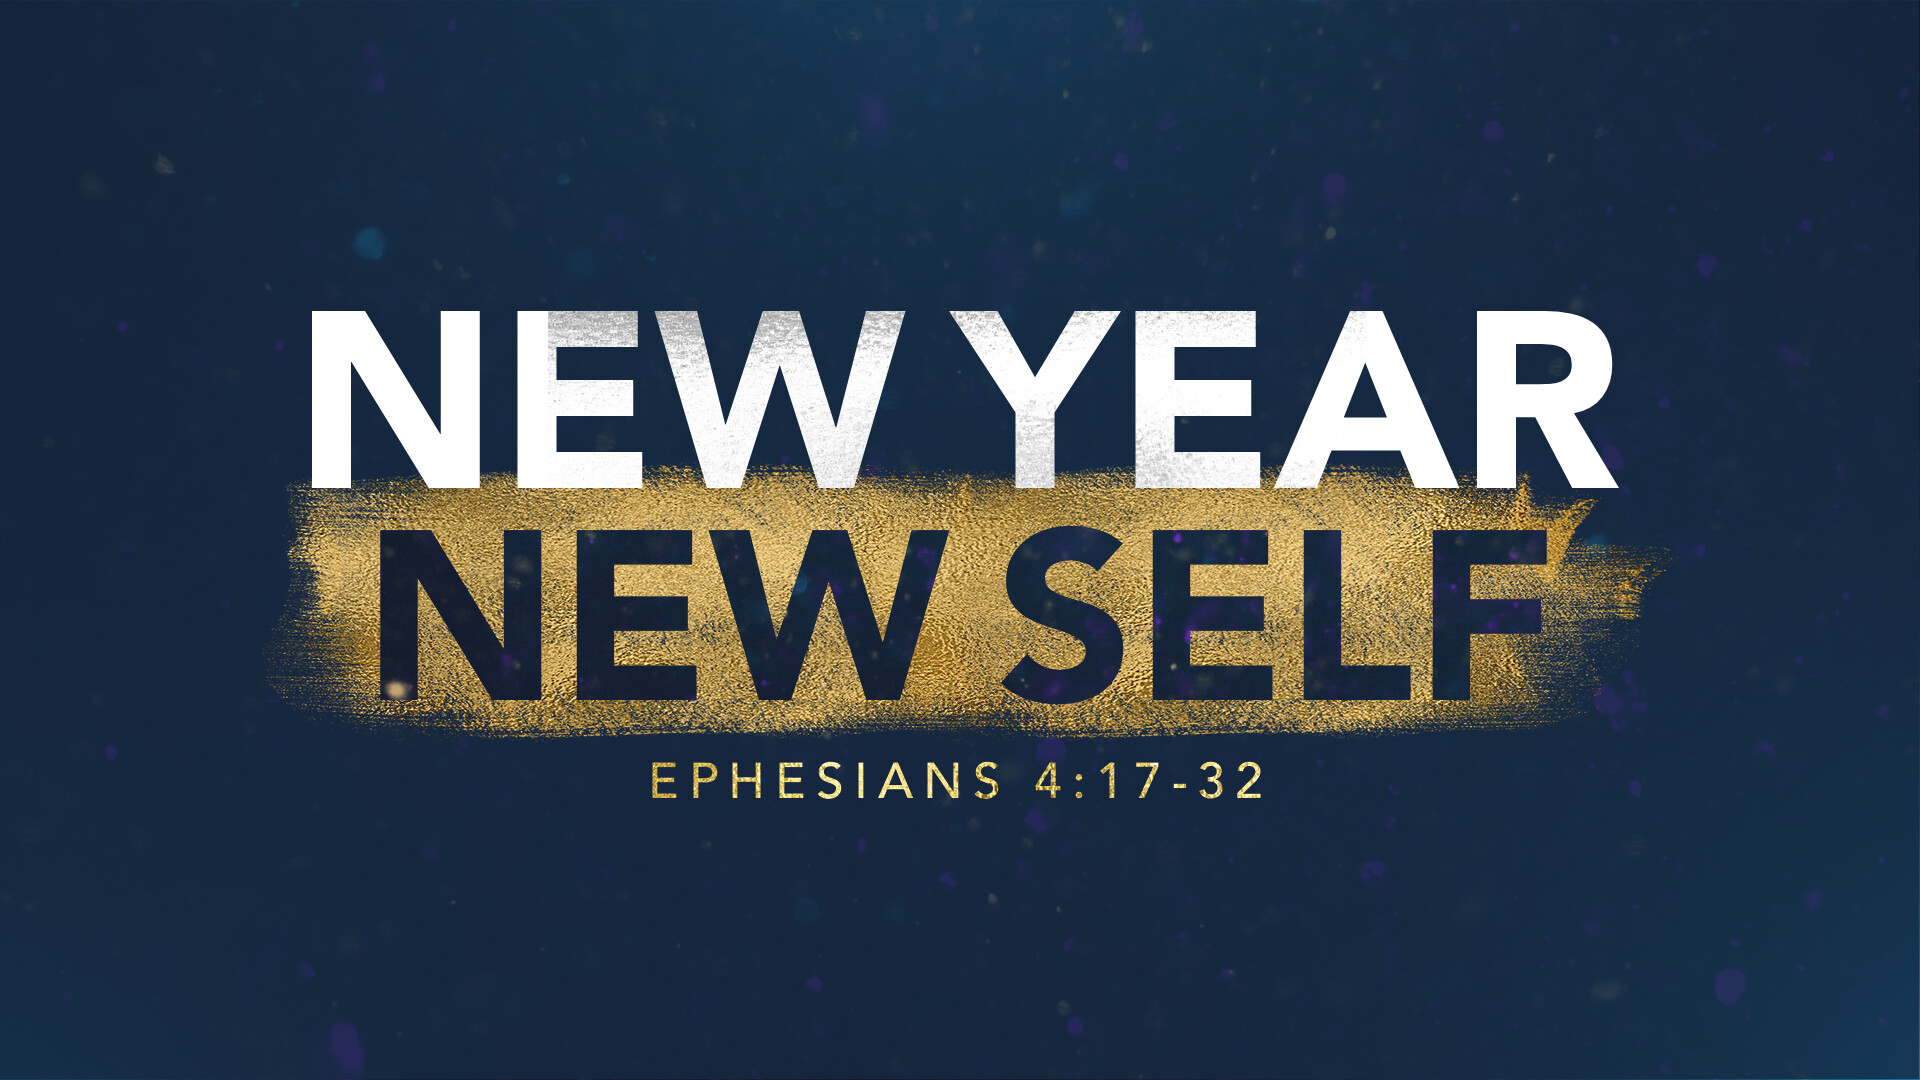 New Year, New Self